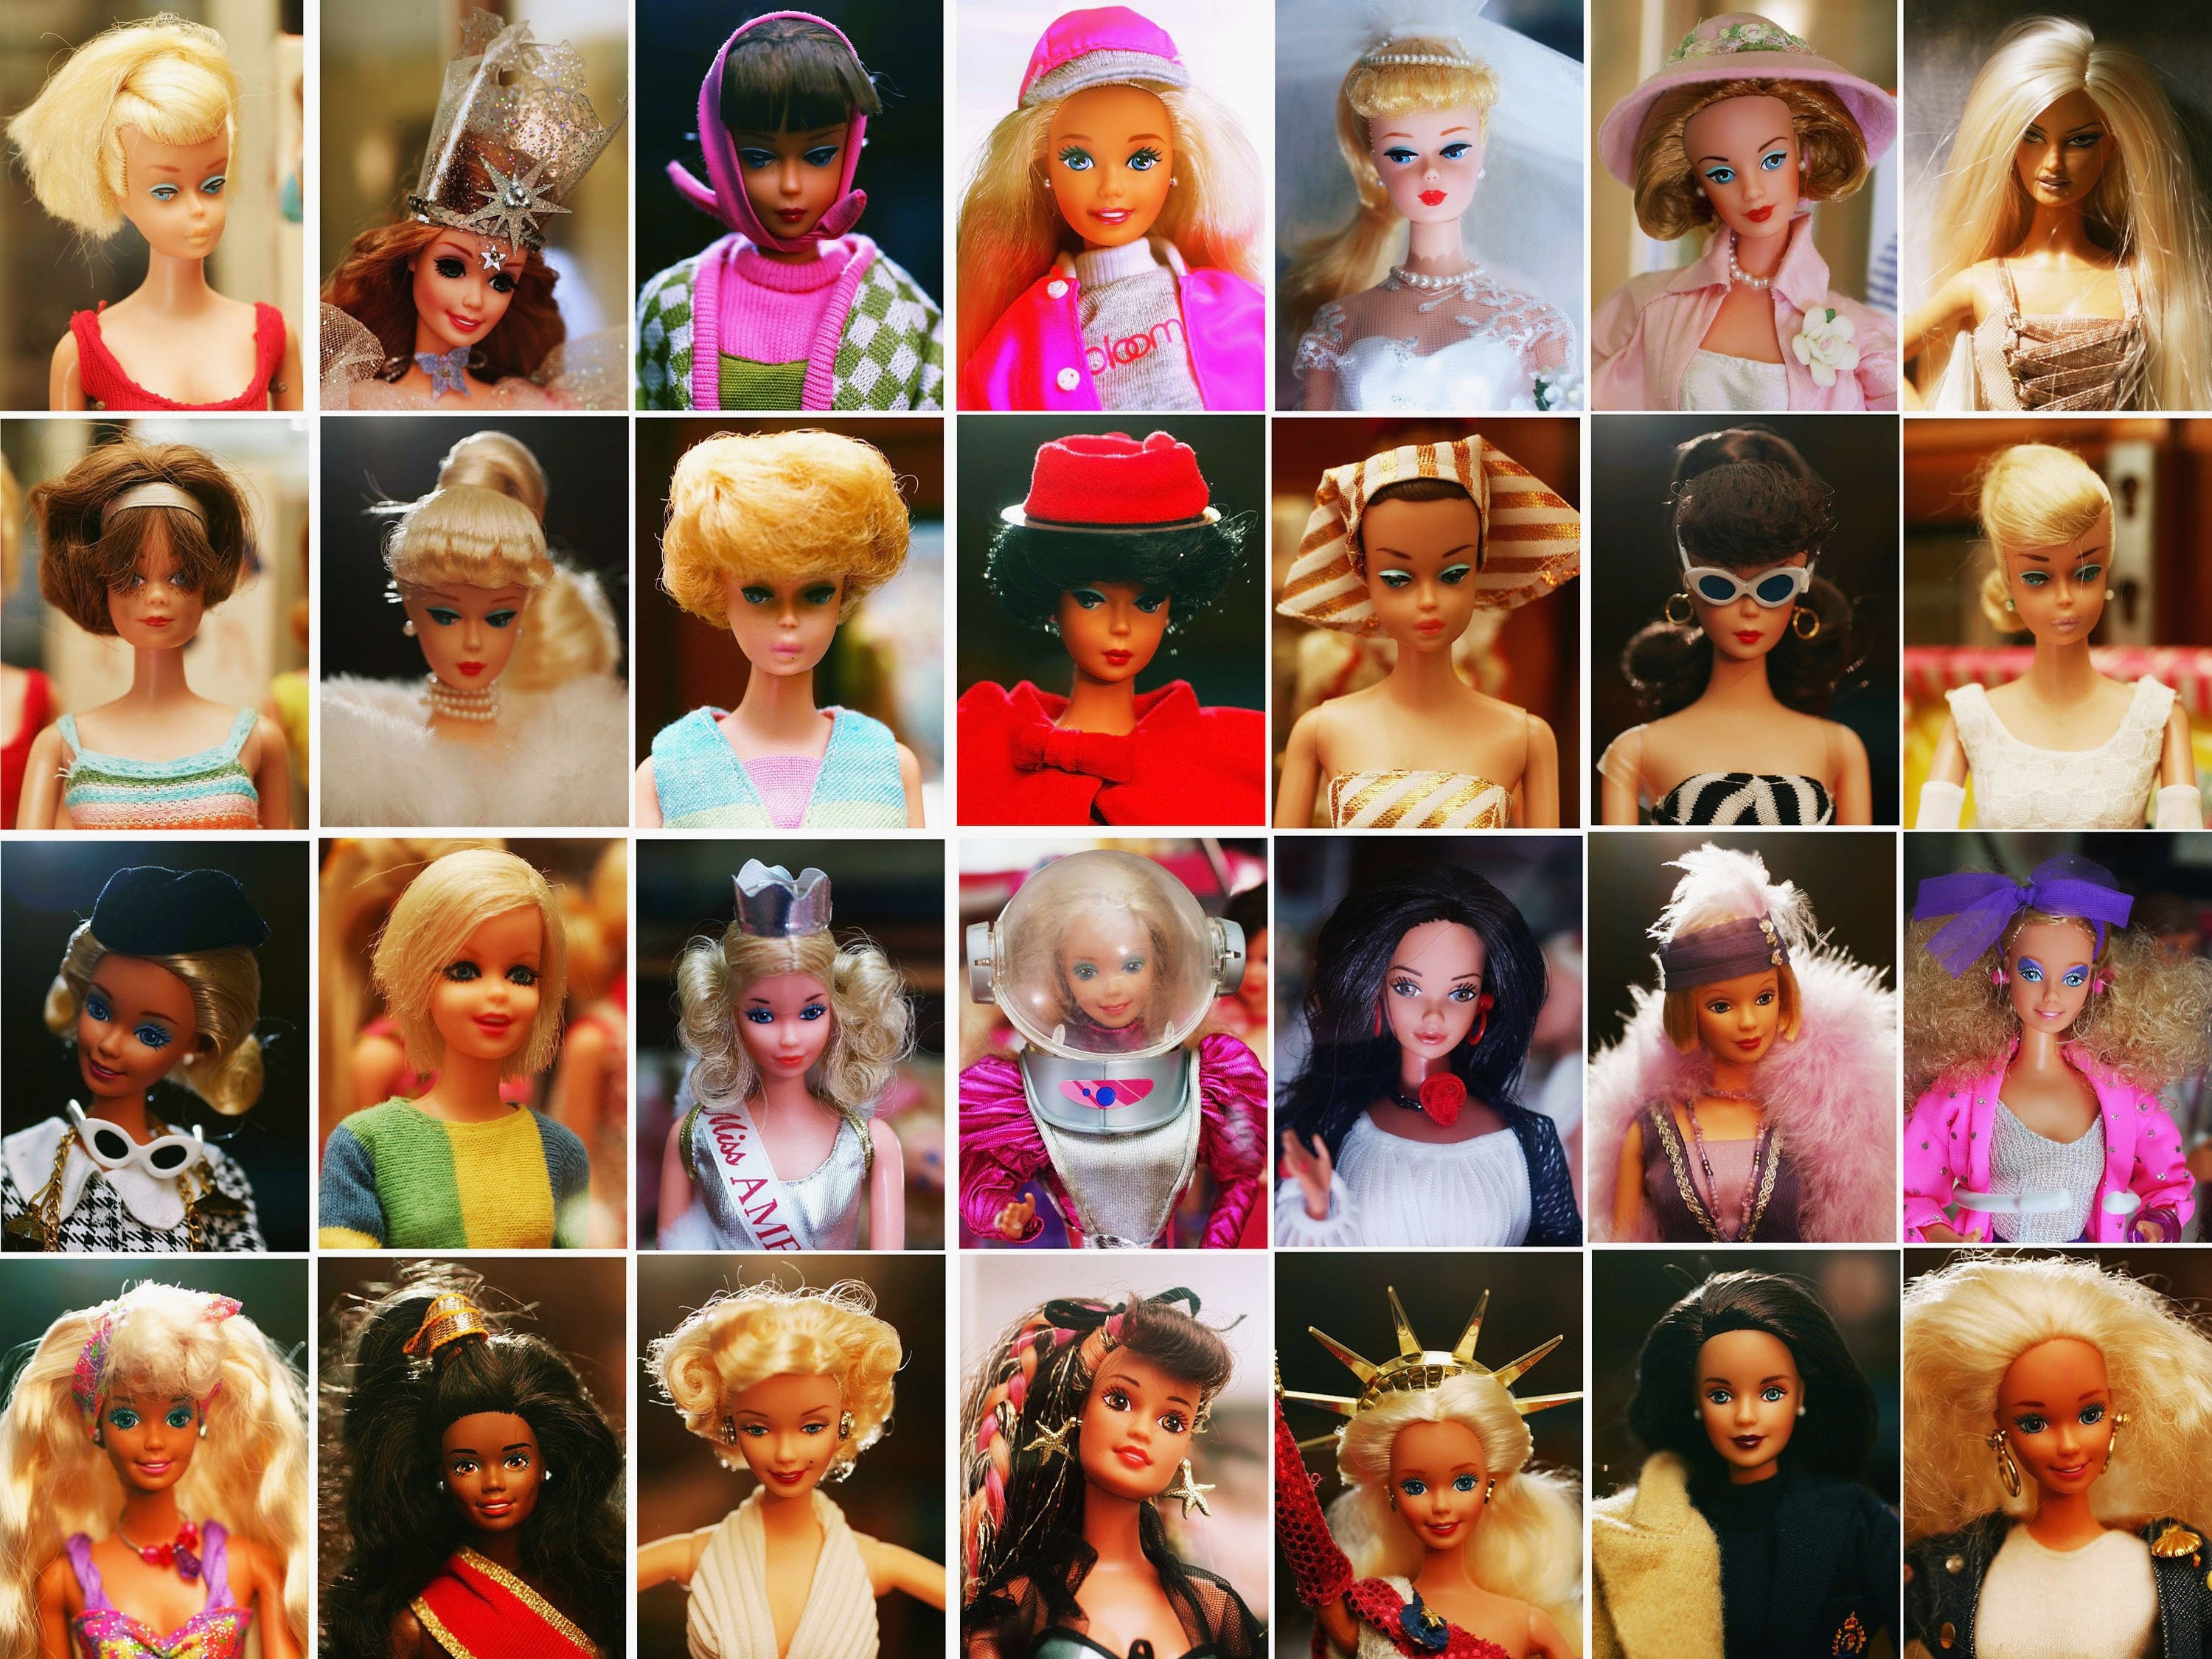 groentje tornado operator Barbie Facts: National Barbie Day celebrates Mattel's iconic doll